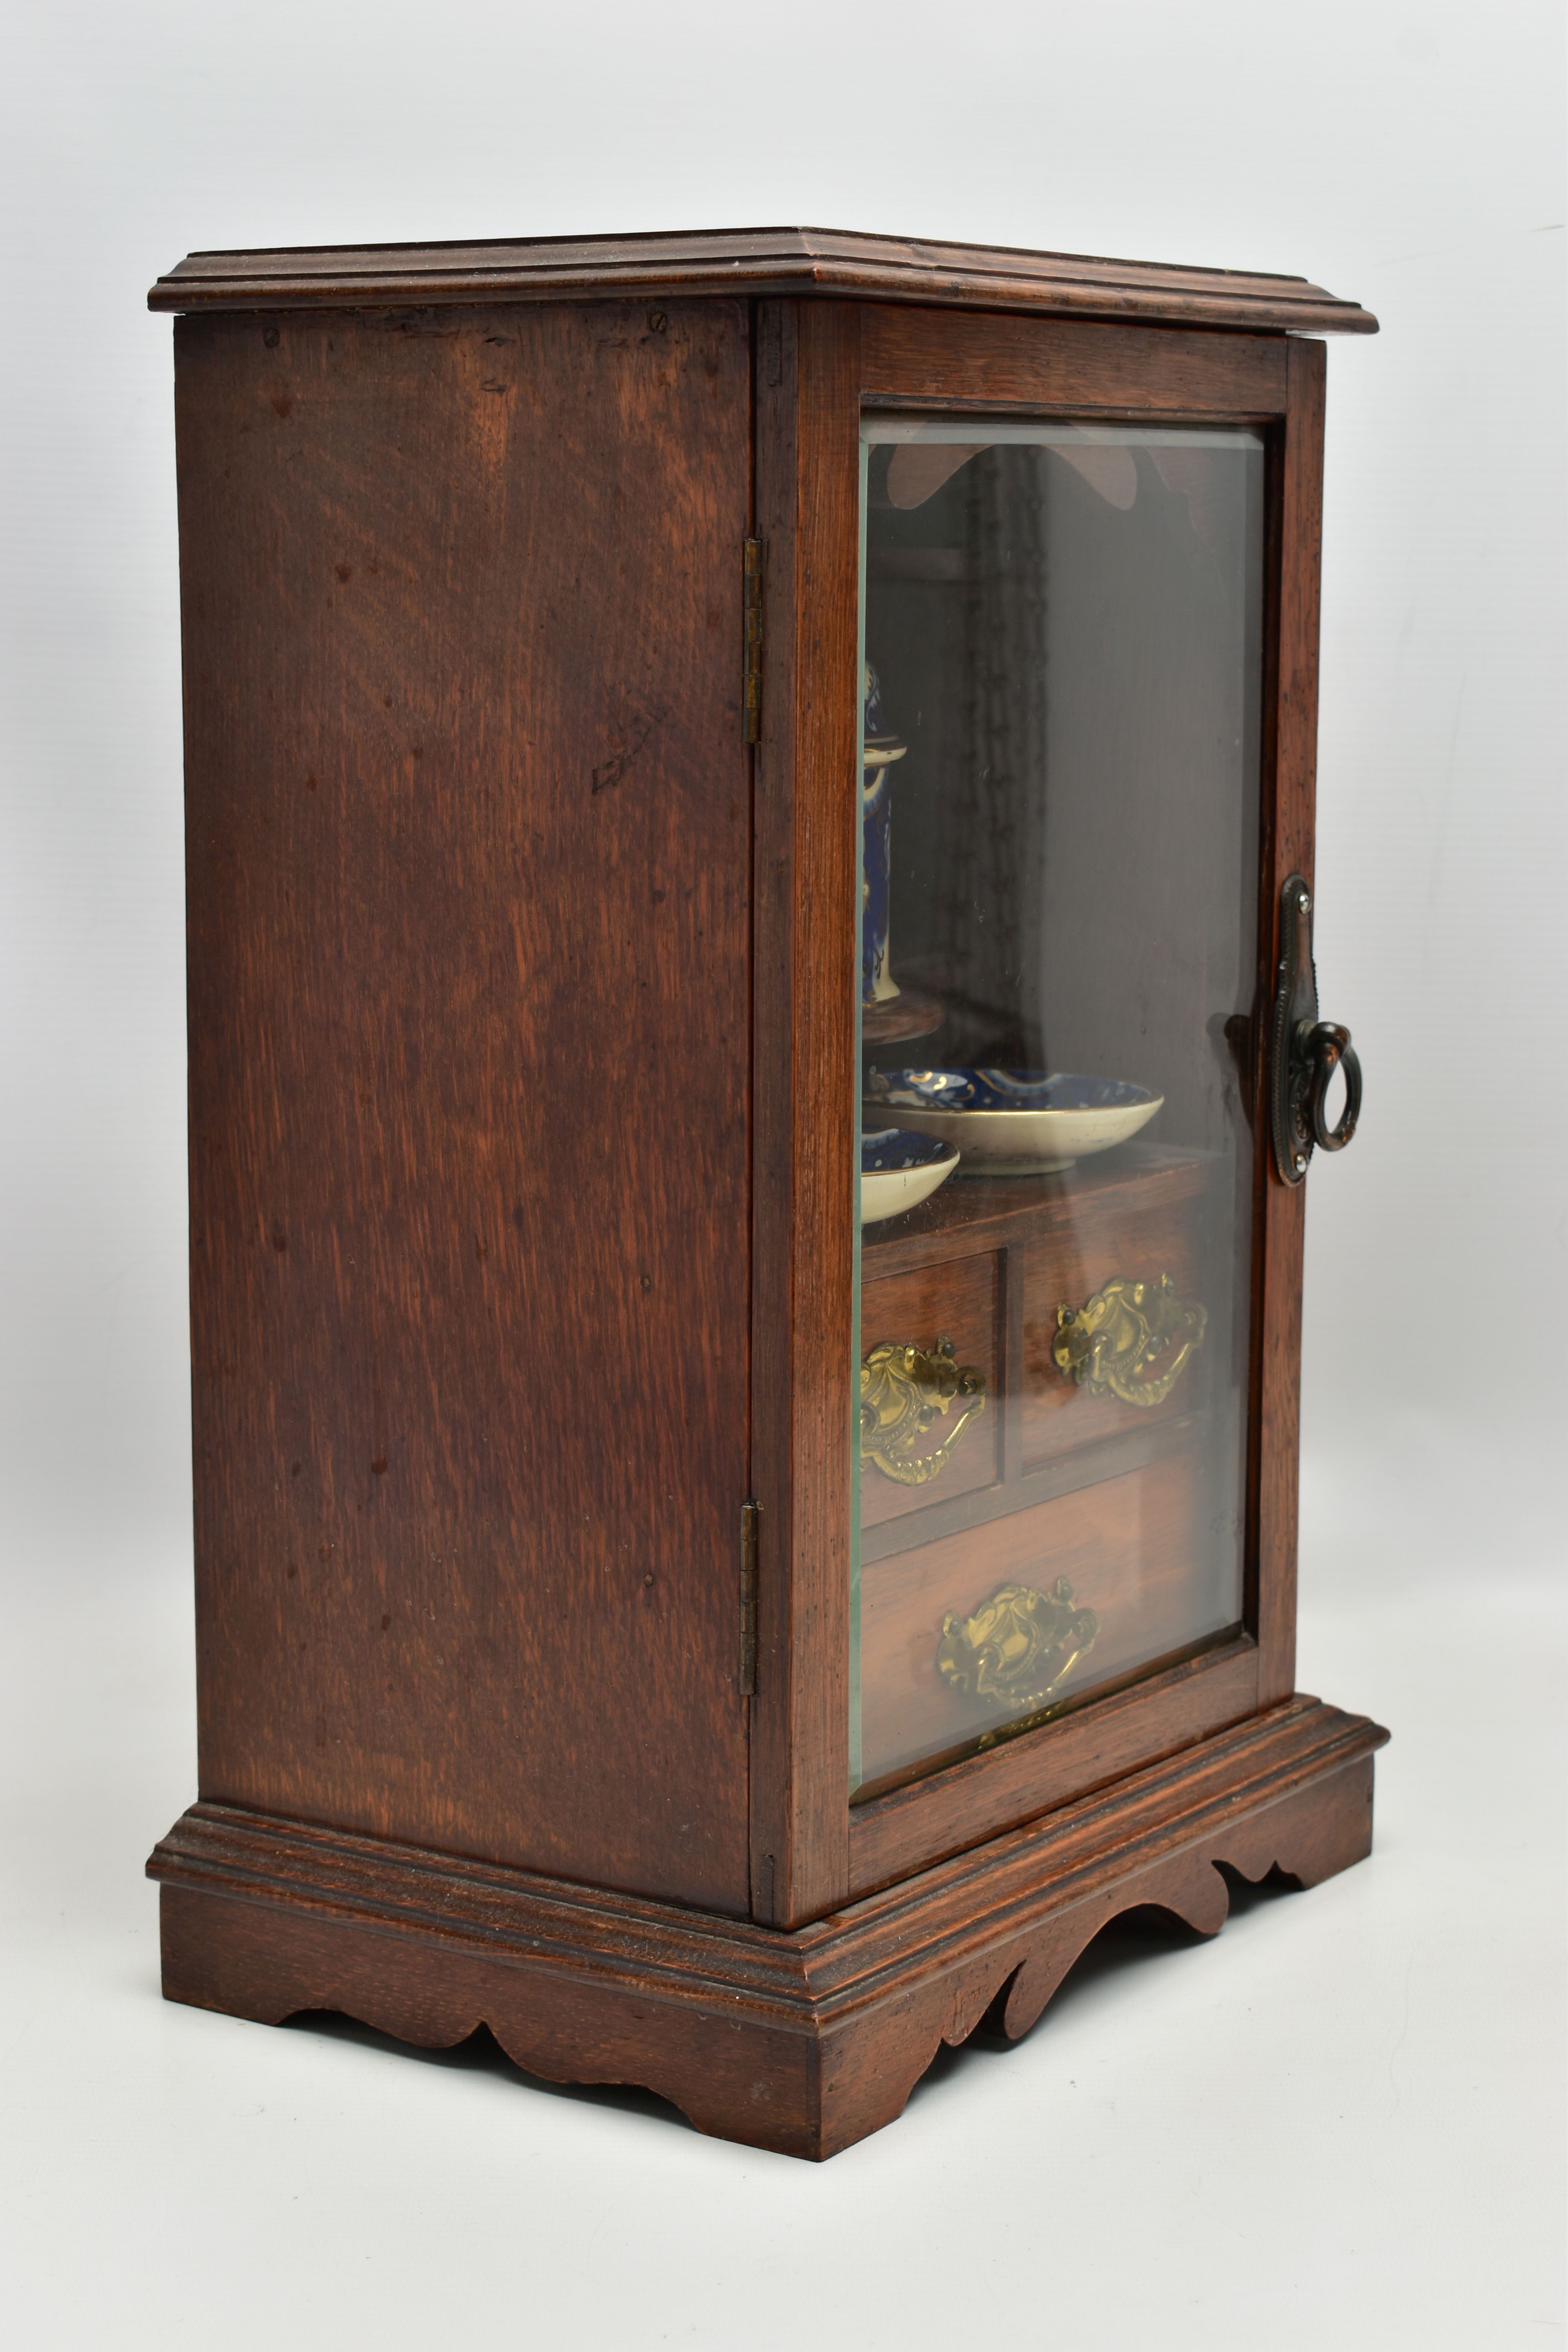 A LATE VICTORIAN OAK CASED SMOKERS CABINET, the bevel edged glazed door opening to reveal a pipe - Image 4 of 11